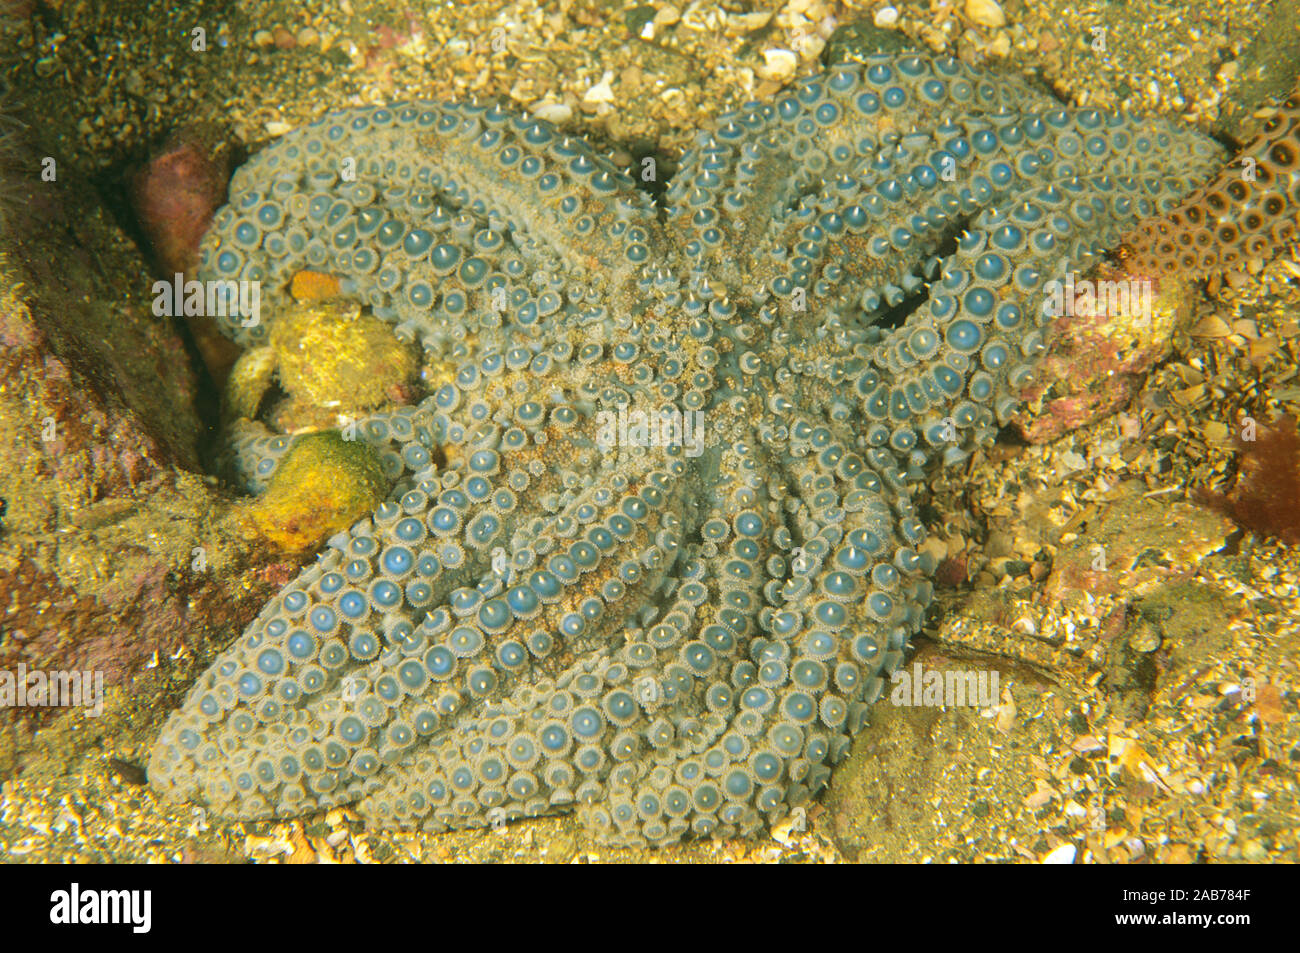 Eleven-armed sea star (Coscinasterias muricata), can have between nine and fifteen arms. Northern New South Wales, Australia Stock Photo